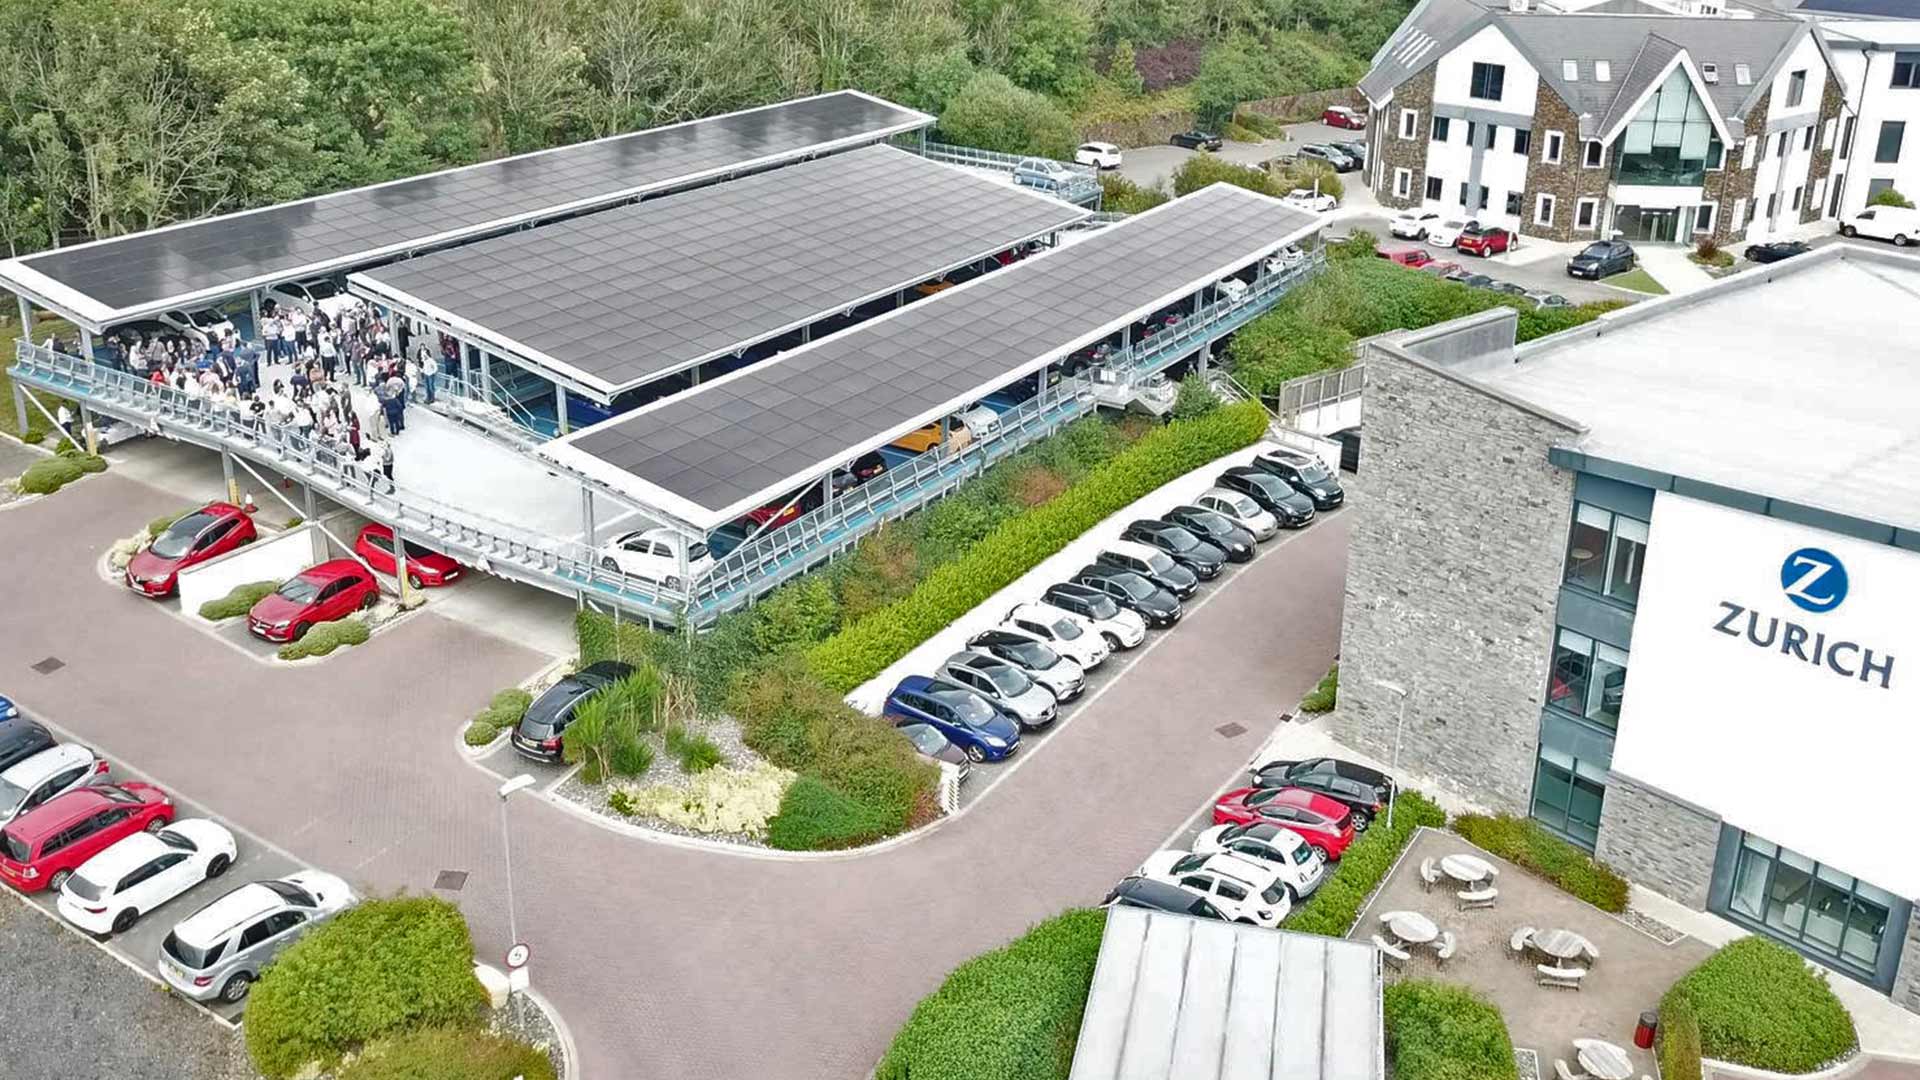 Zurich building with Solar panels